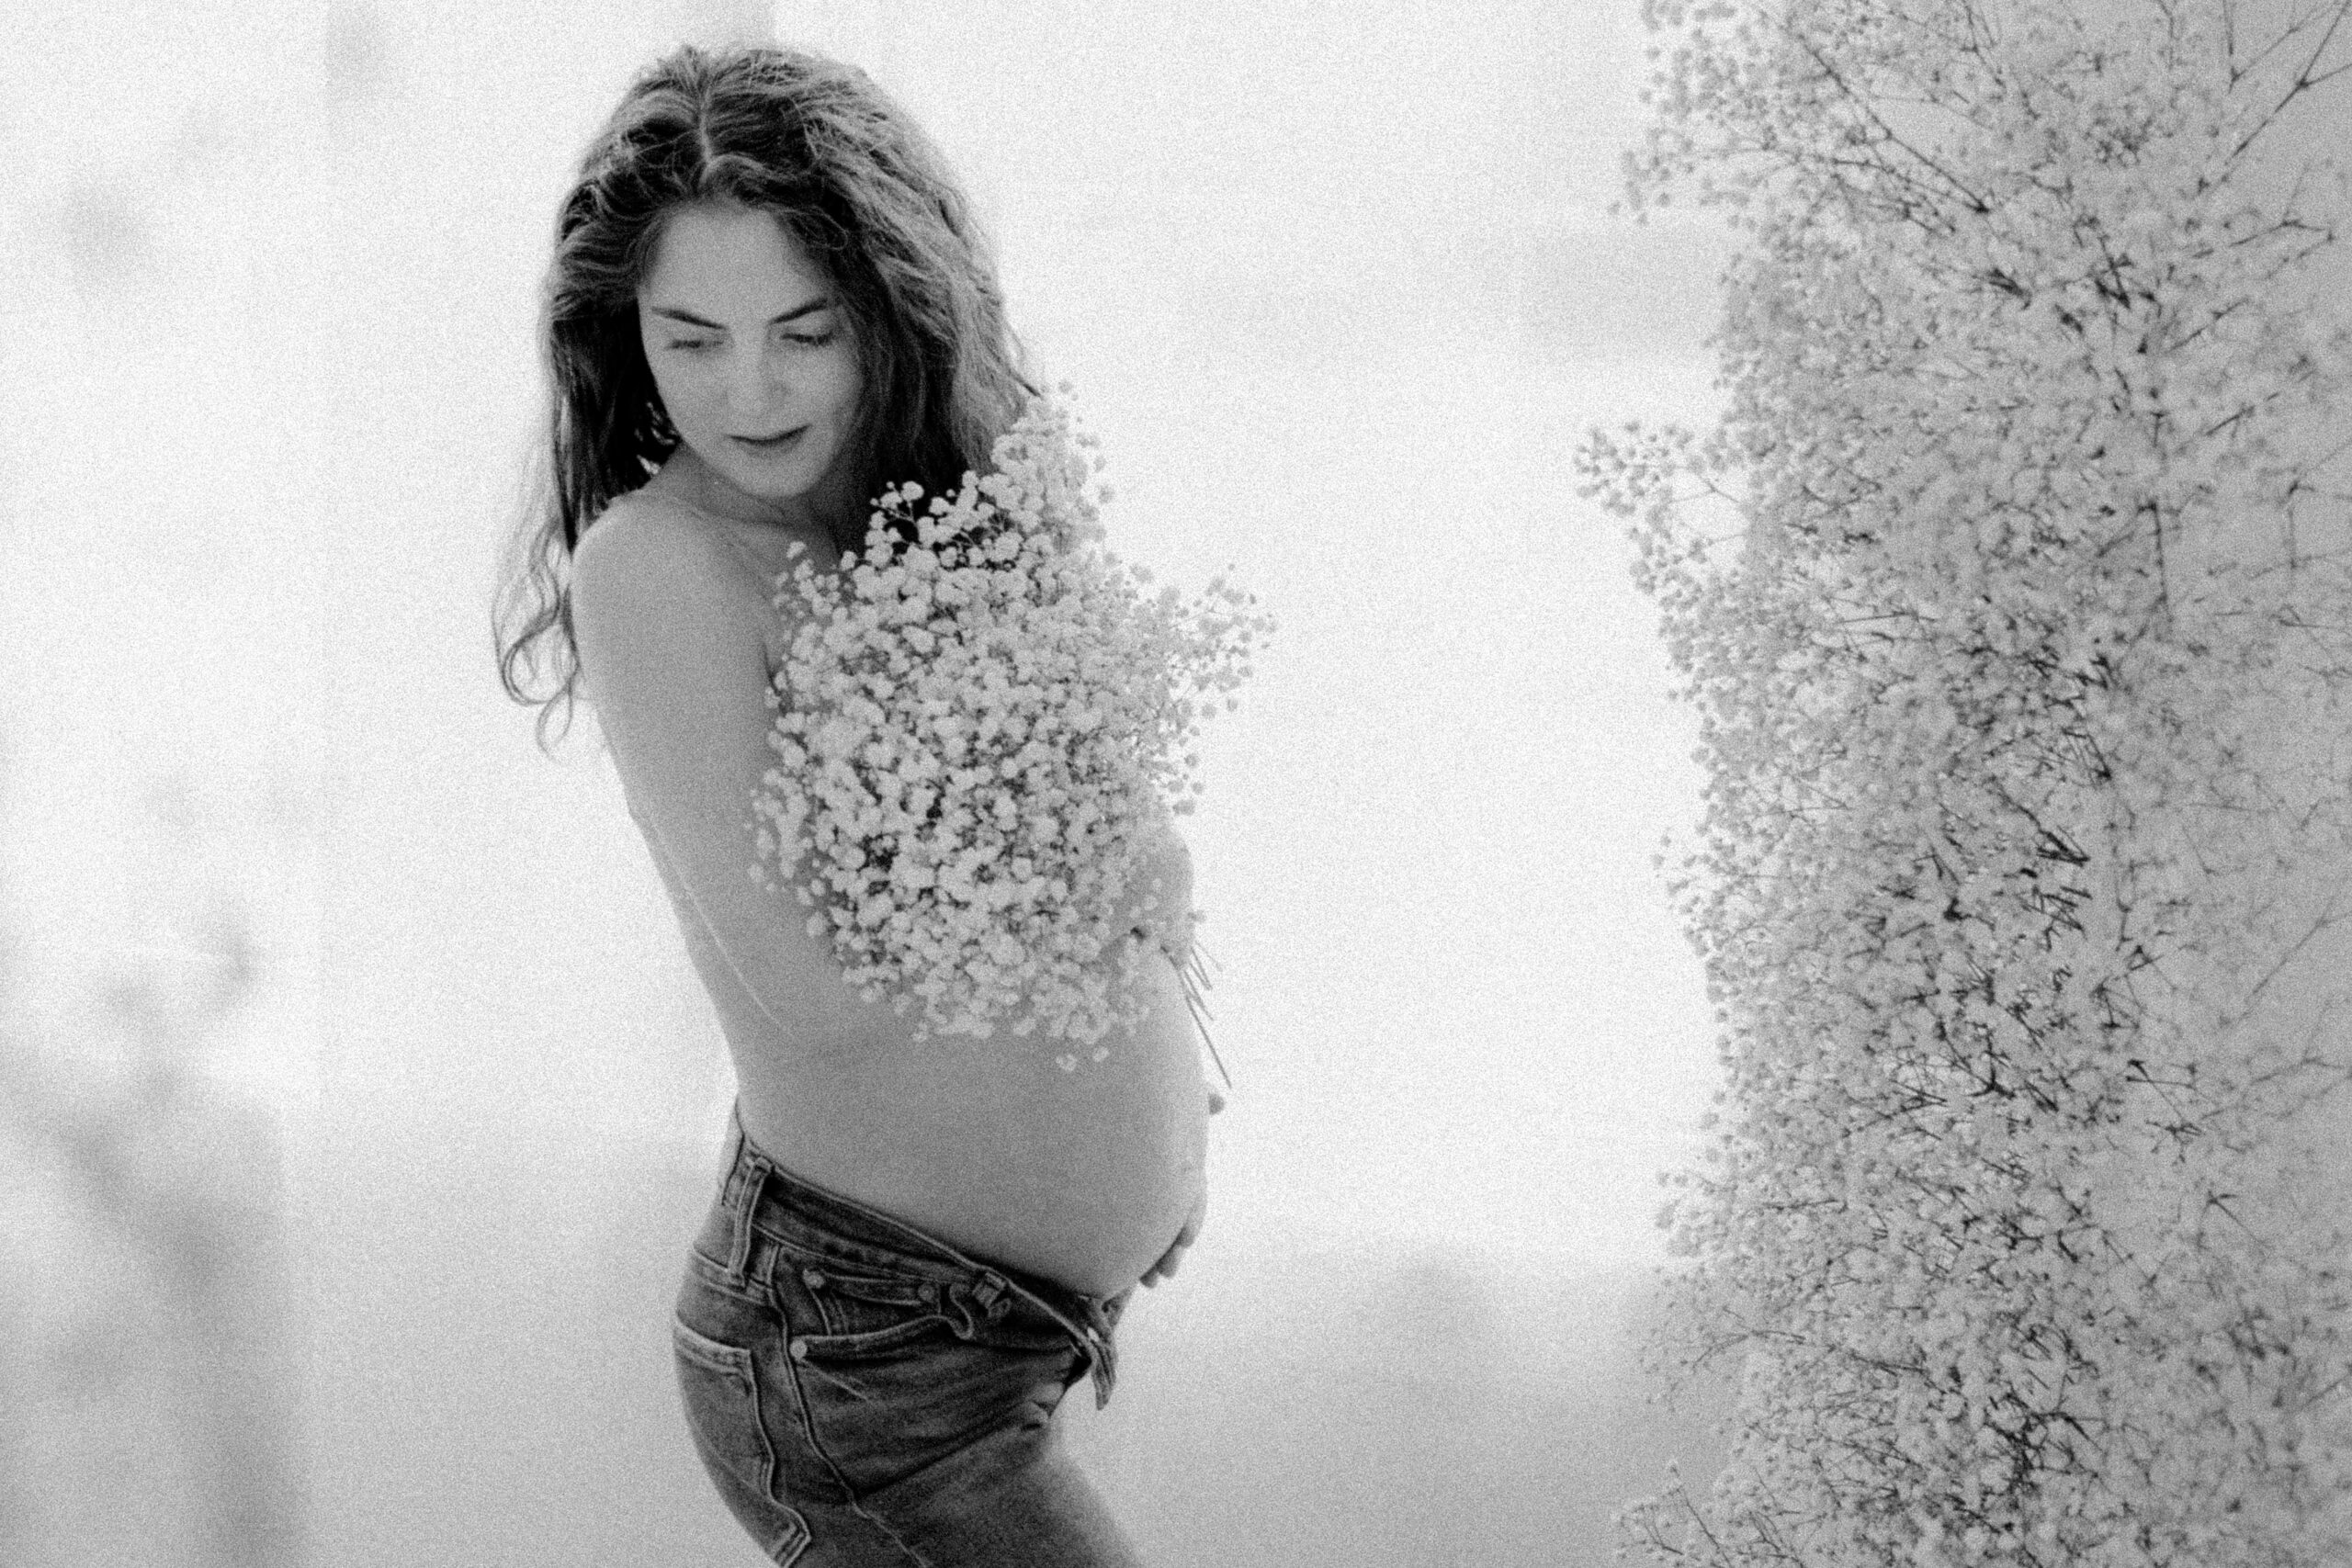 black and white image of pregnant woman with flowers